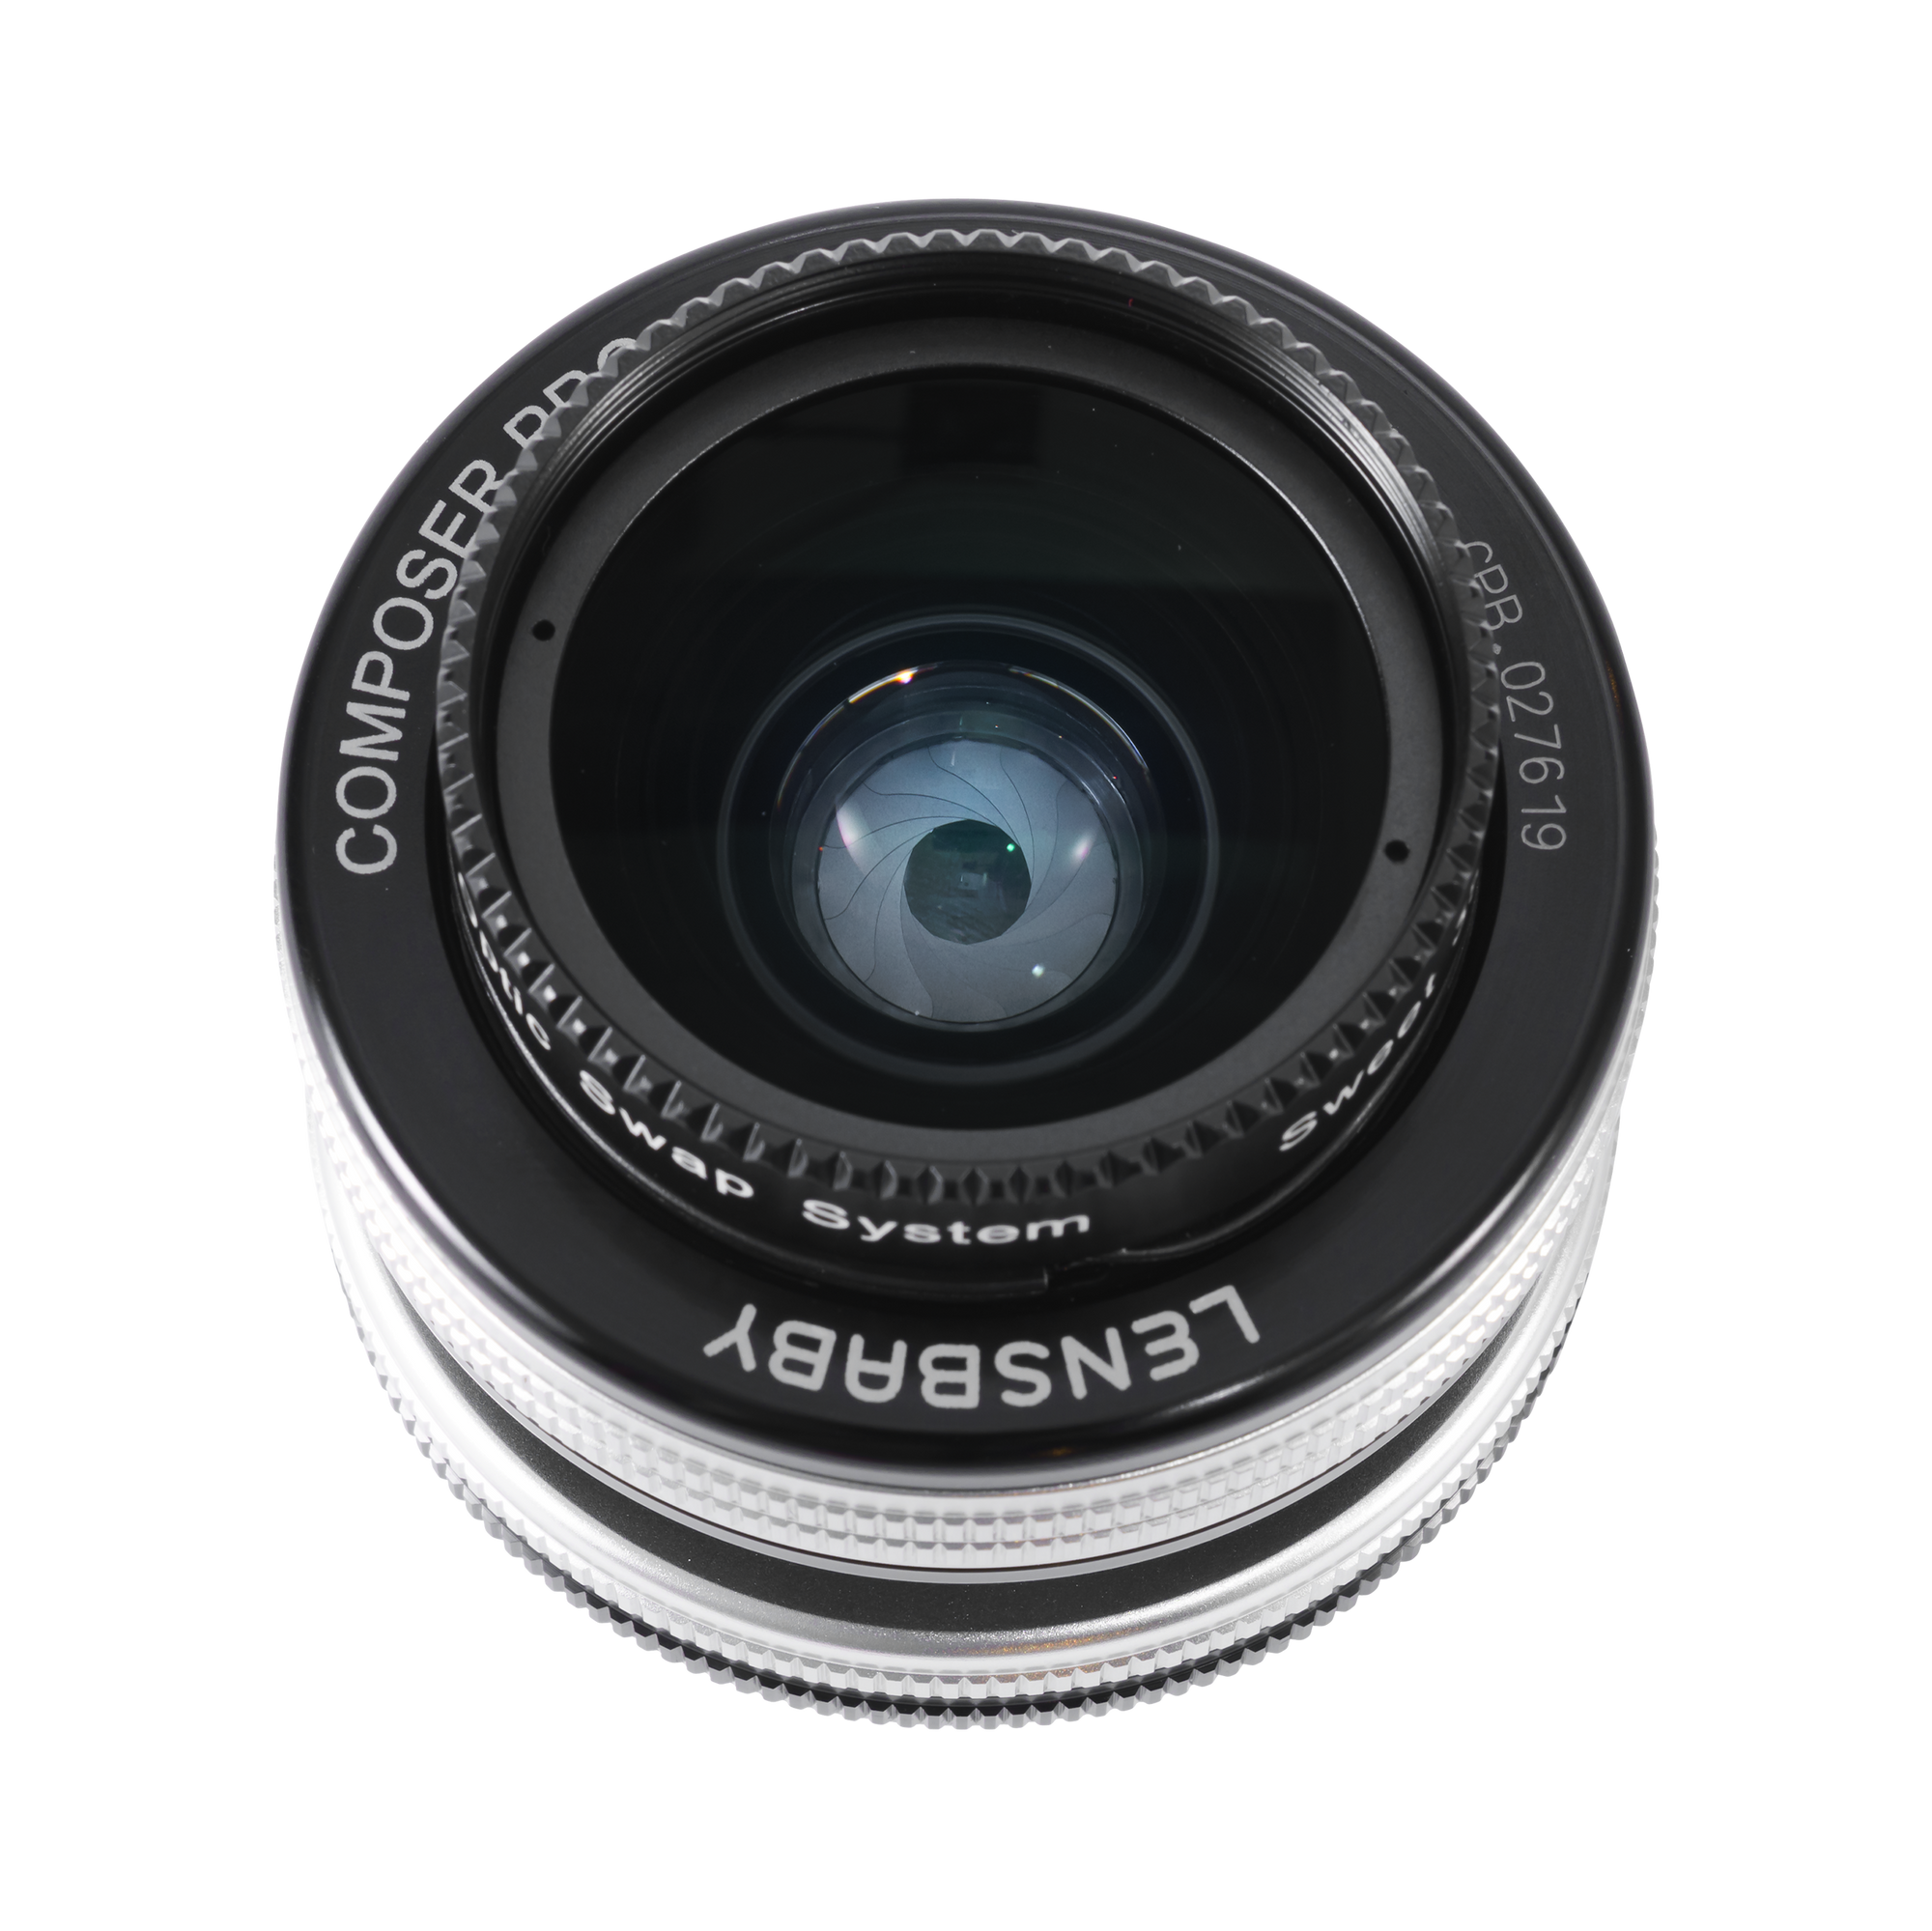 Composer Pro II With Sweet 35 Optic Camera Lens | Lensbaby